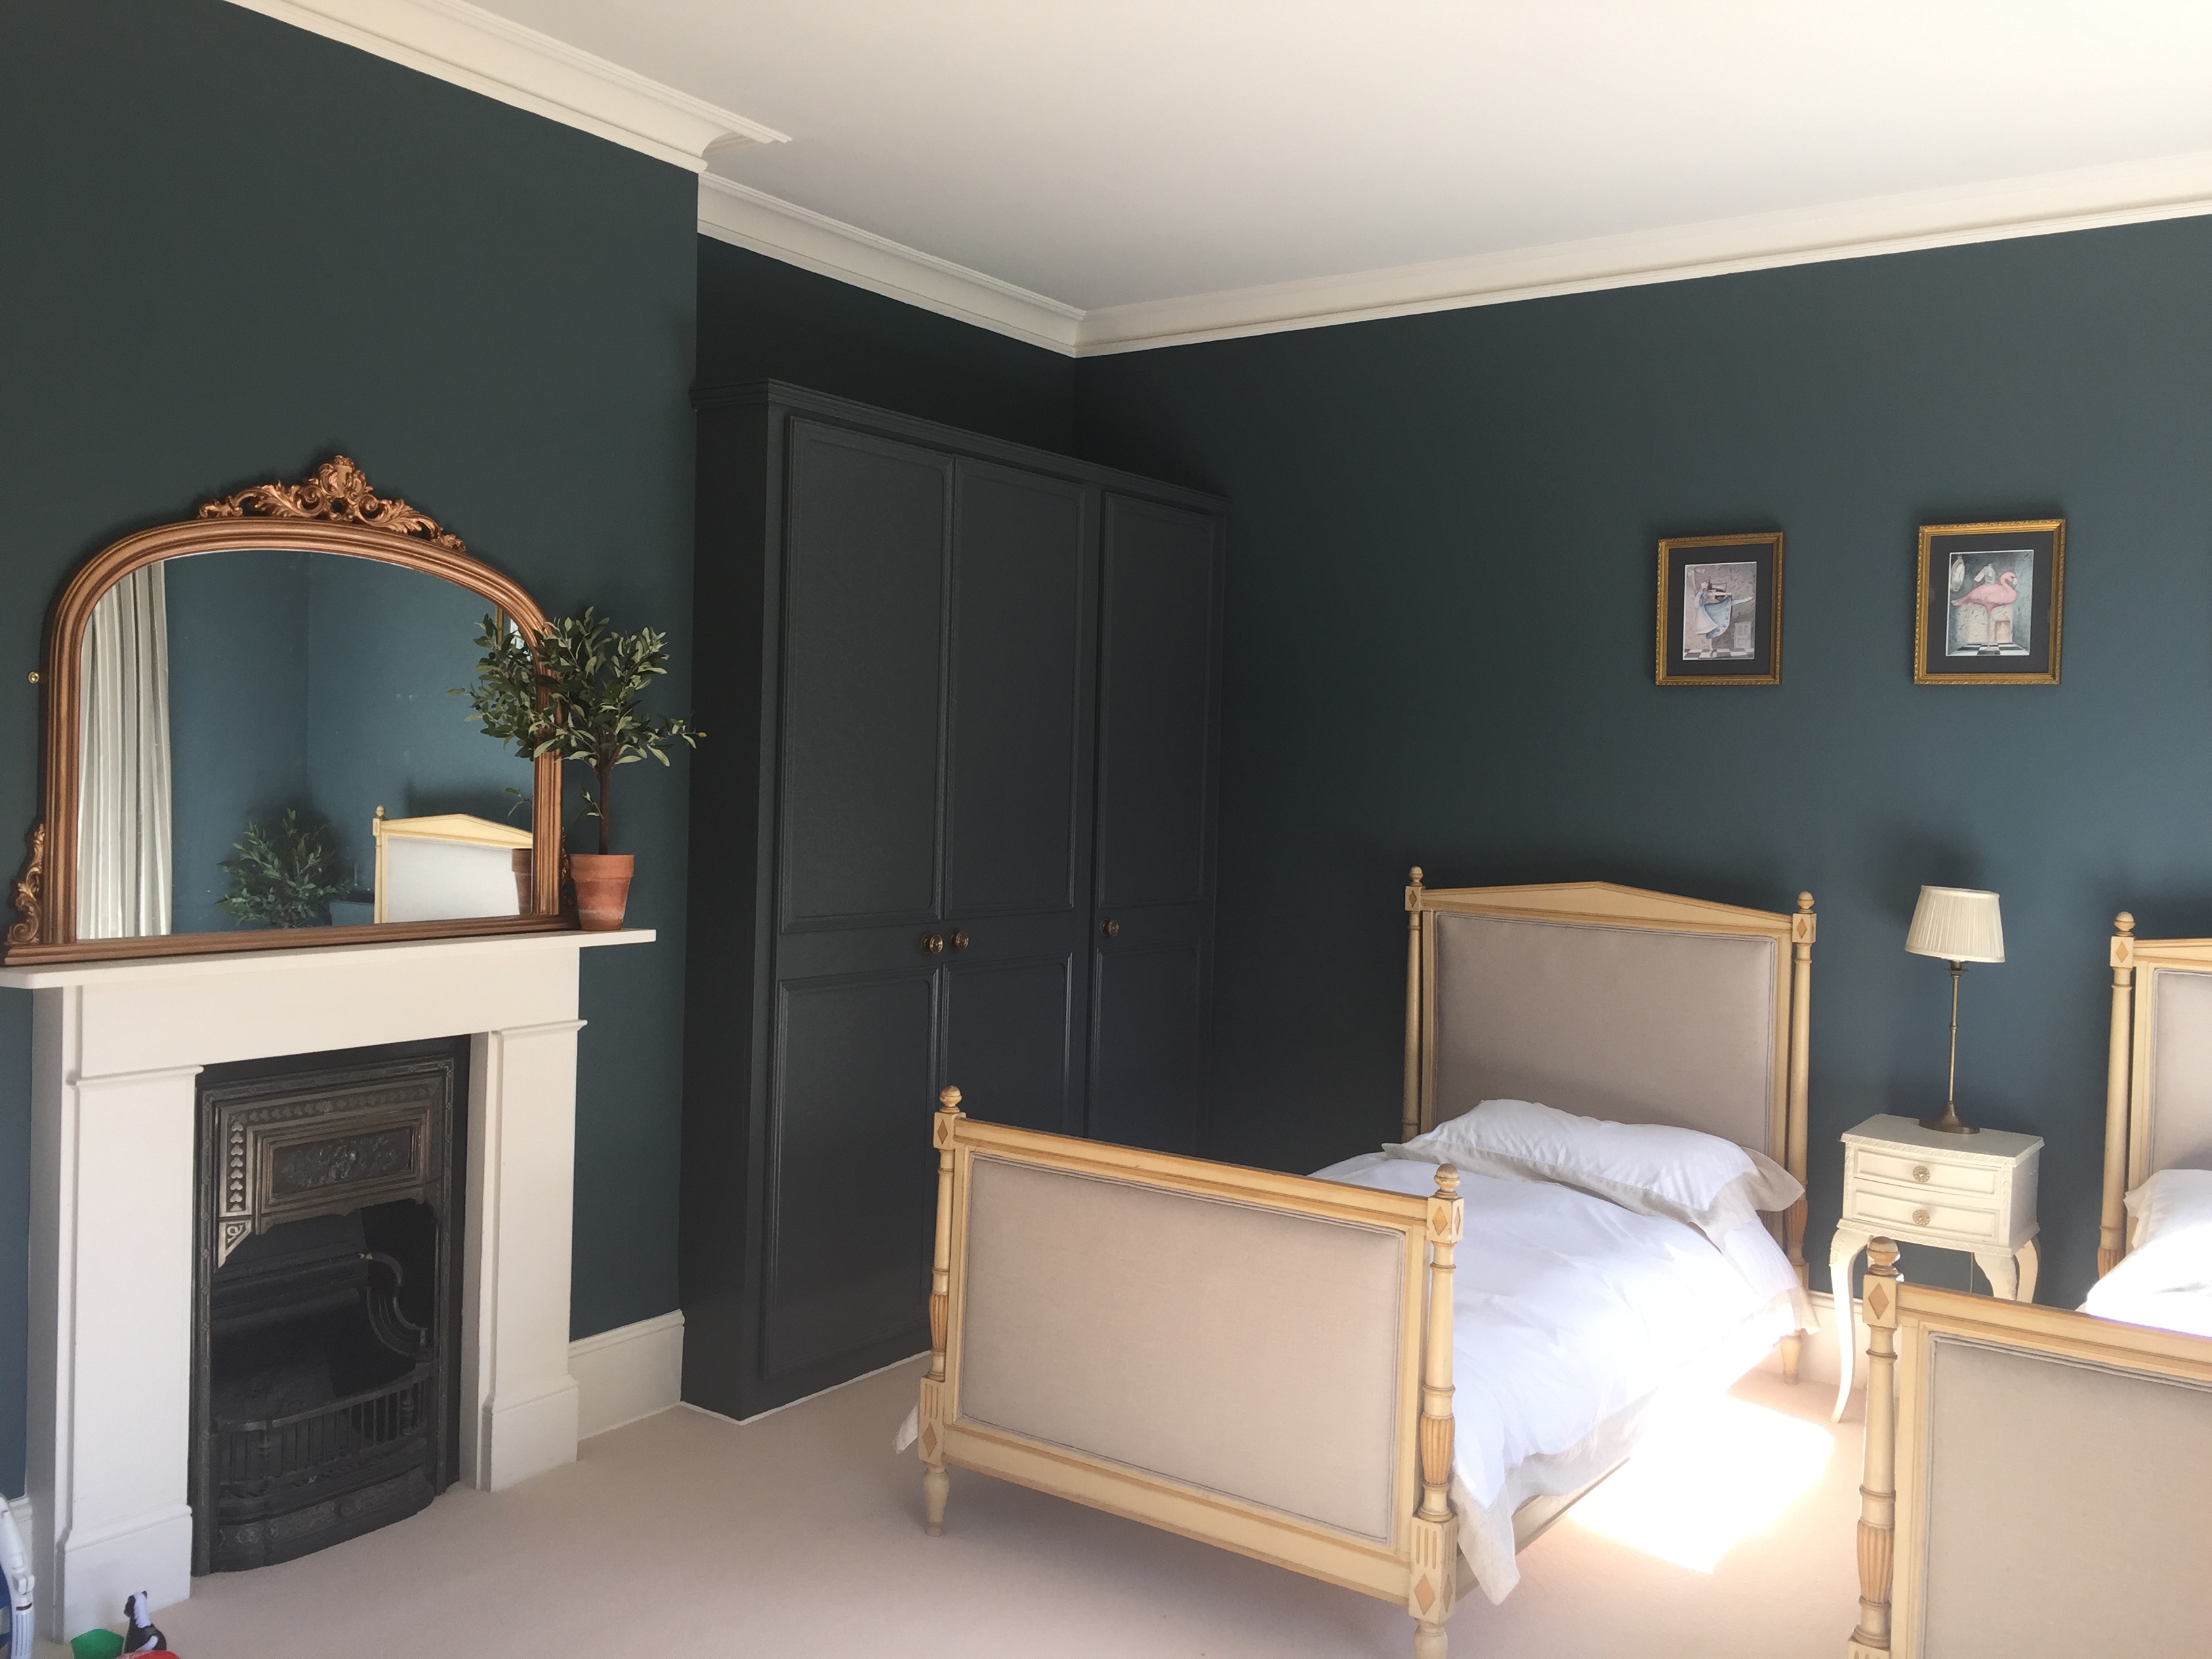 </p> <p>Find your ideal home design pro on designfor-me.com - get matched and see who's interested in your home project. Click image to see more inspiration from our design pros</p> <p>Design by Amy, Interior designer from Tunbridge Wells, South East</p> <p> #interiordesign #interiors #homedecor #homeinspiration #luxuryarchitecture #luxurydecor #luxurydesign #bedrooms #bedroomdesign #bedroominspiration #bedroomideas </p> <p>